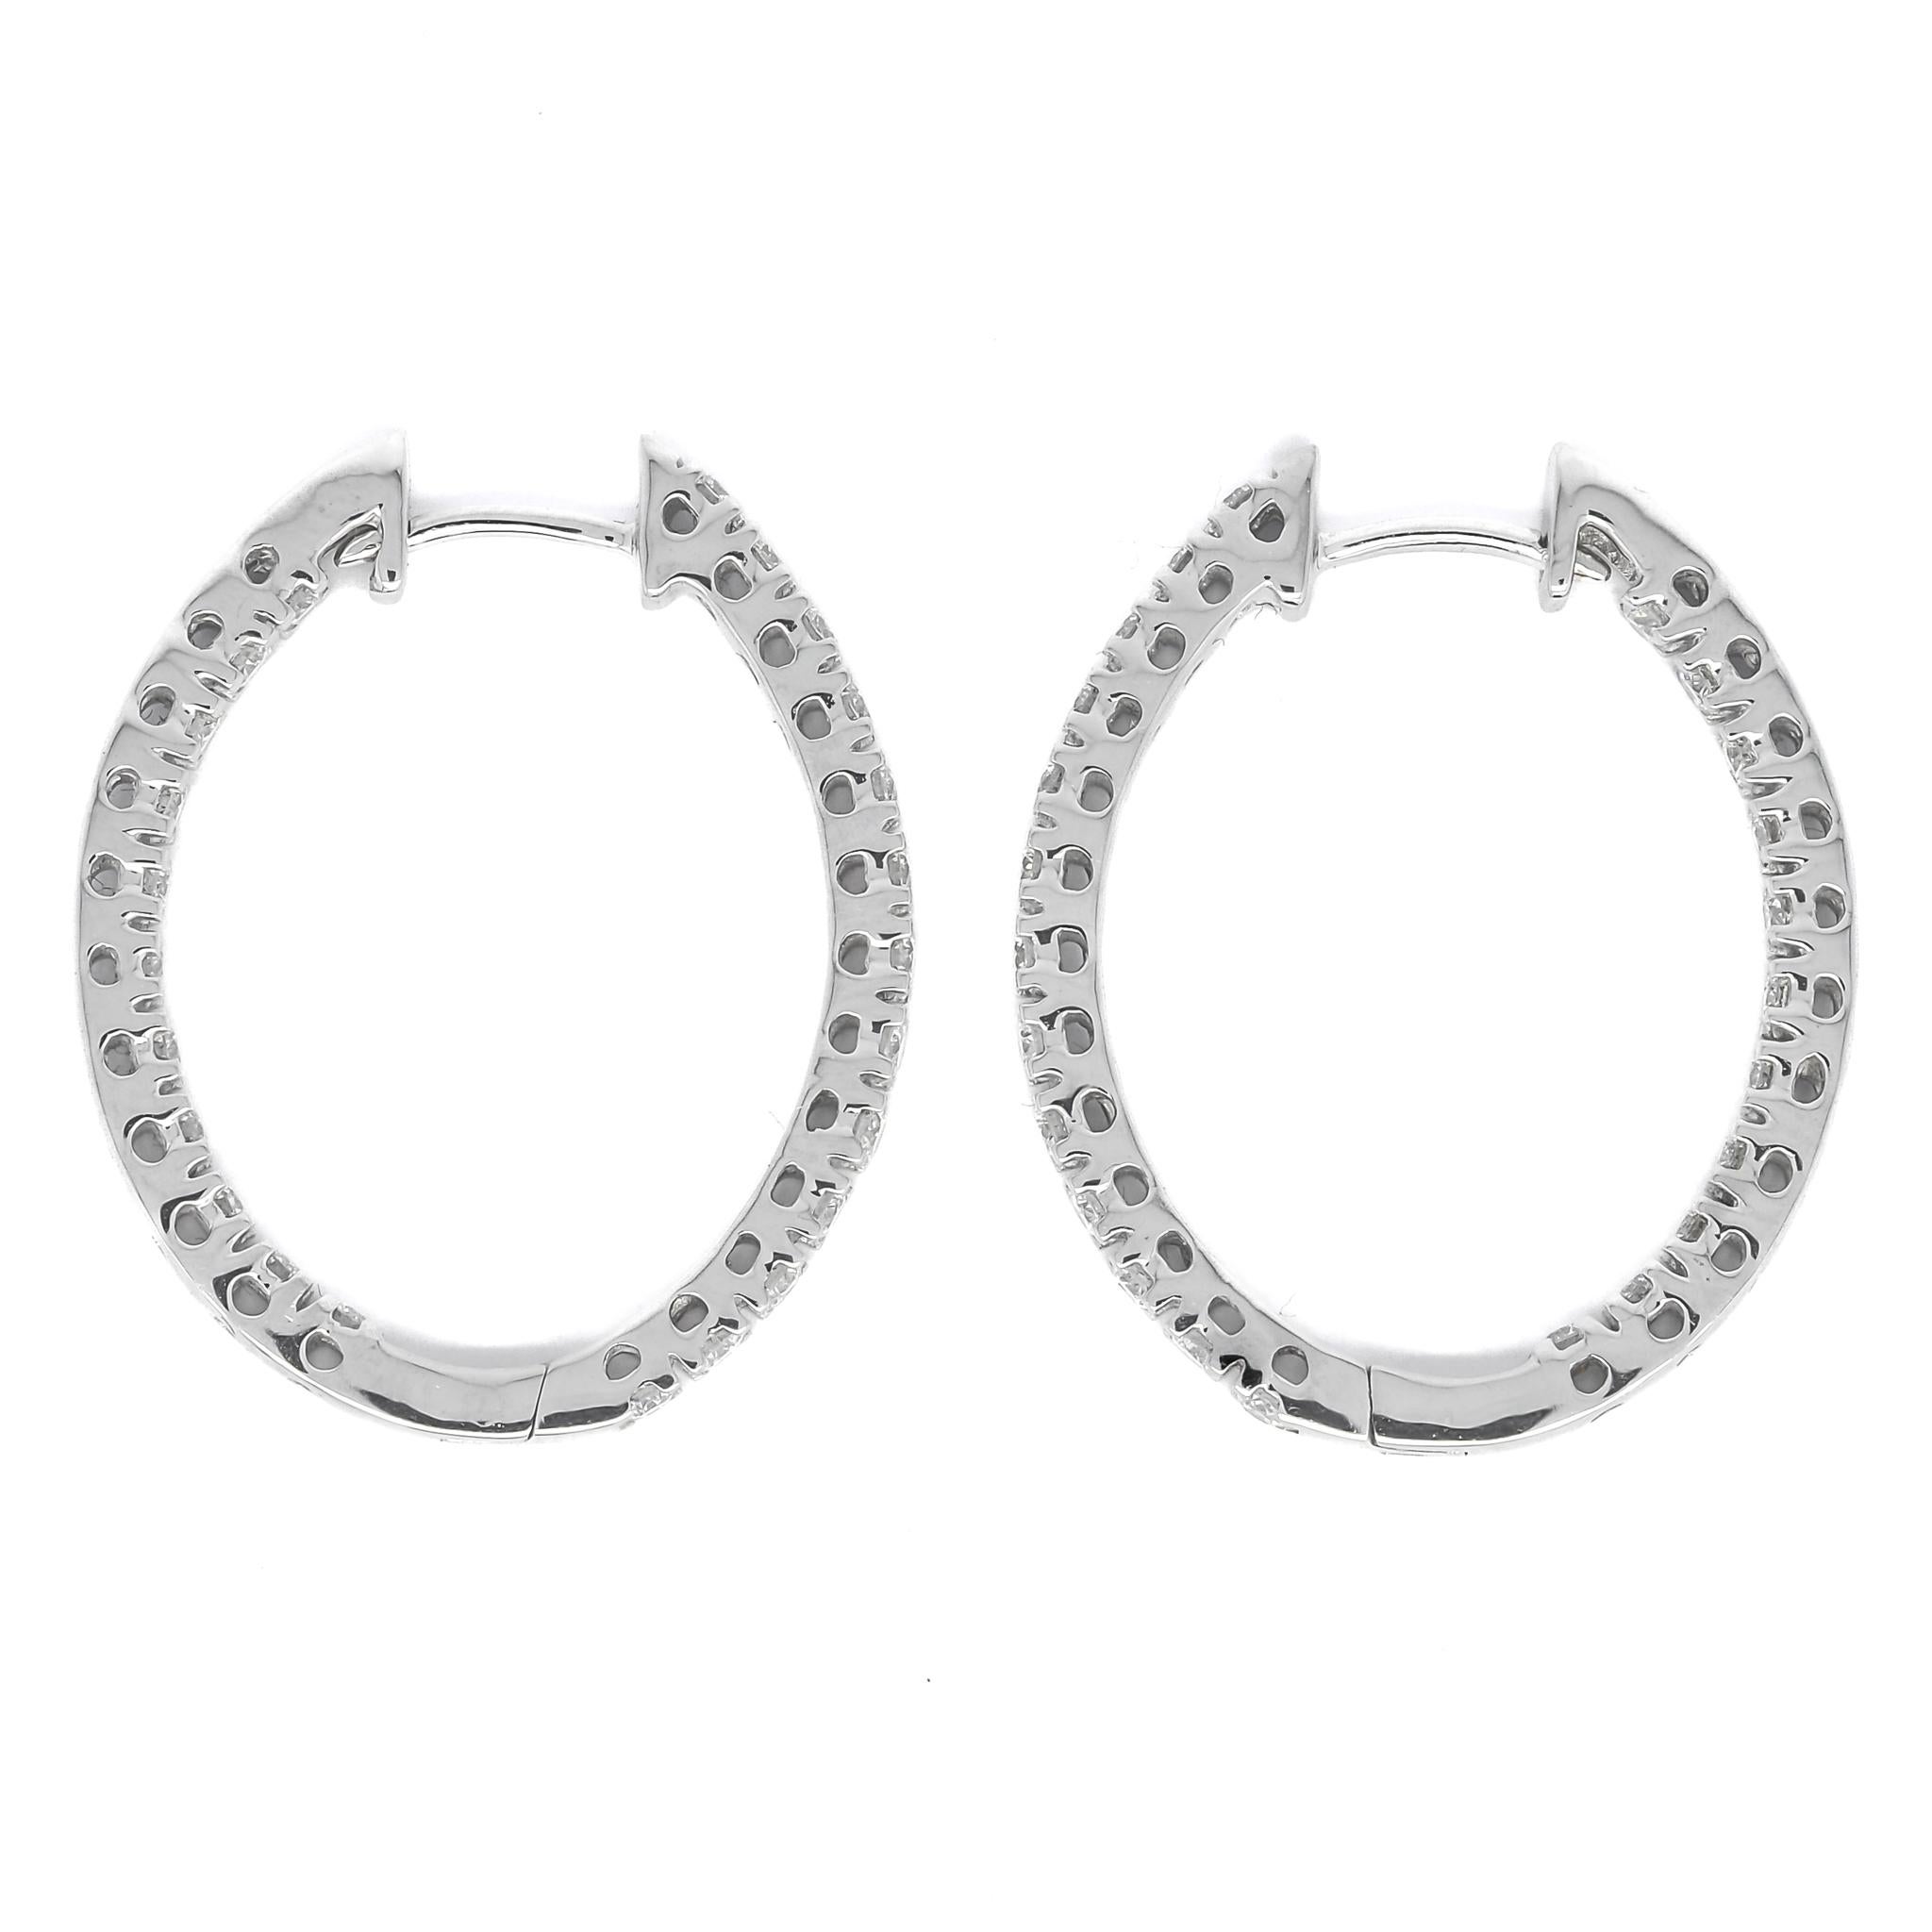 Discover the epitome of luxury with these Natural Diamond 1.20CT 18Karat White Gold Inside Out Brilliant Hoop Earrings. Crafted to perfection, these exquisite earrings feature a stunning arrangement of brilliant-cut diamonds that grace both the